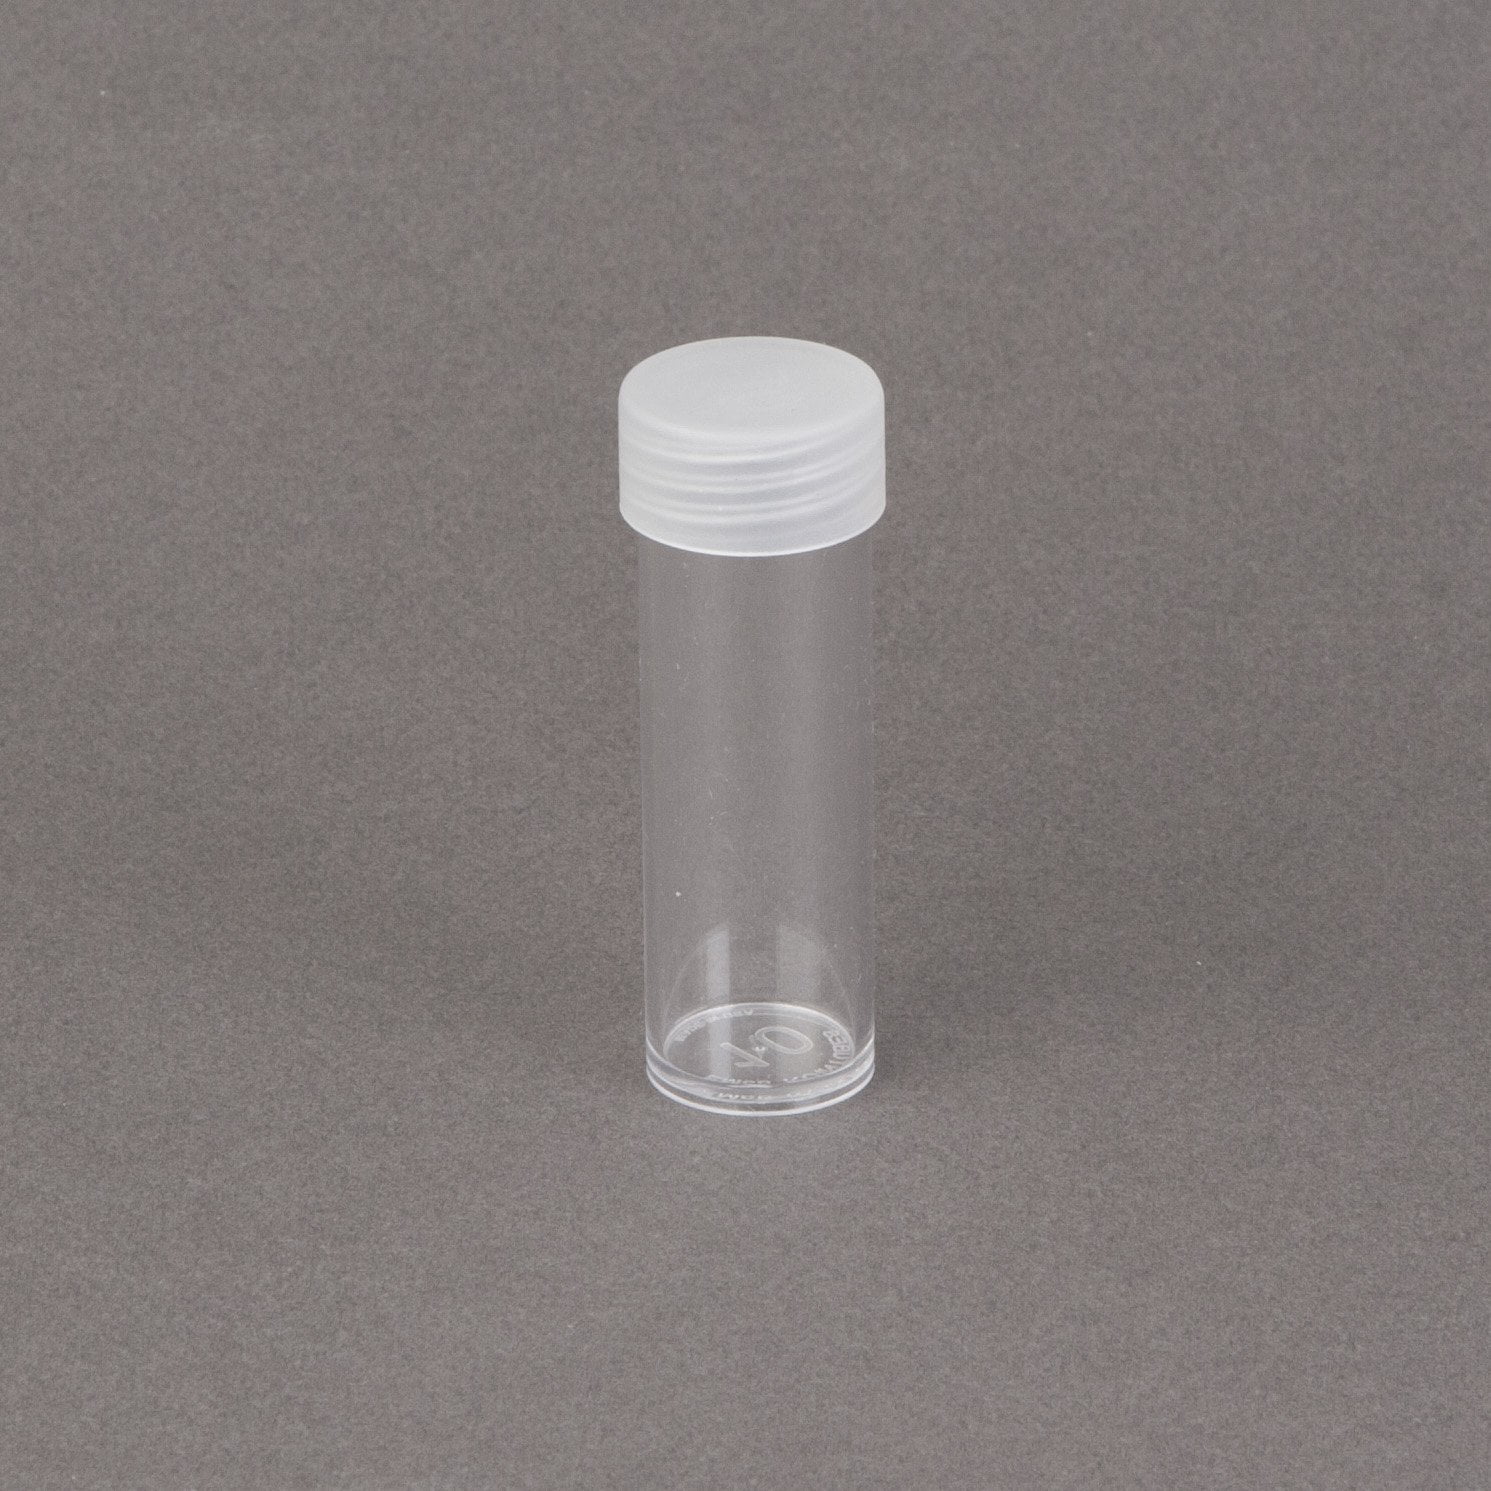 5 NEW BCW ROUND SMALL DOLLAR CLEAR PLASTIC COIN STORAGE TUBES W/ SCREW ON CAPS 